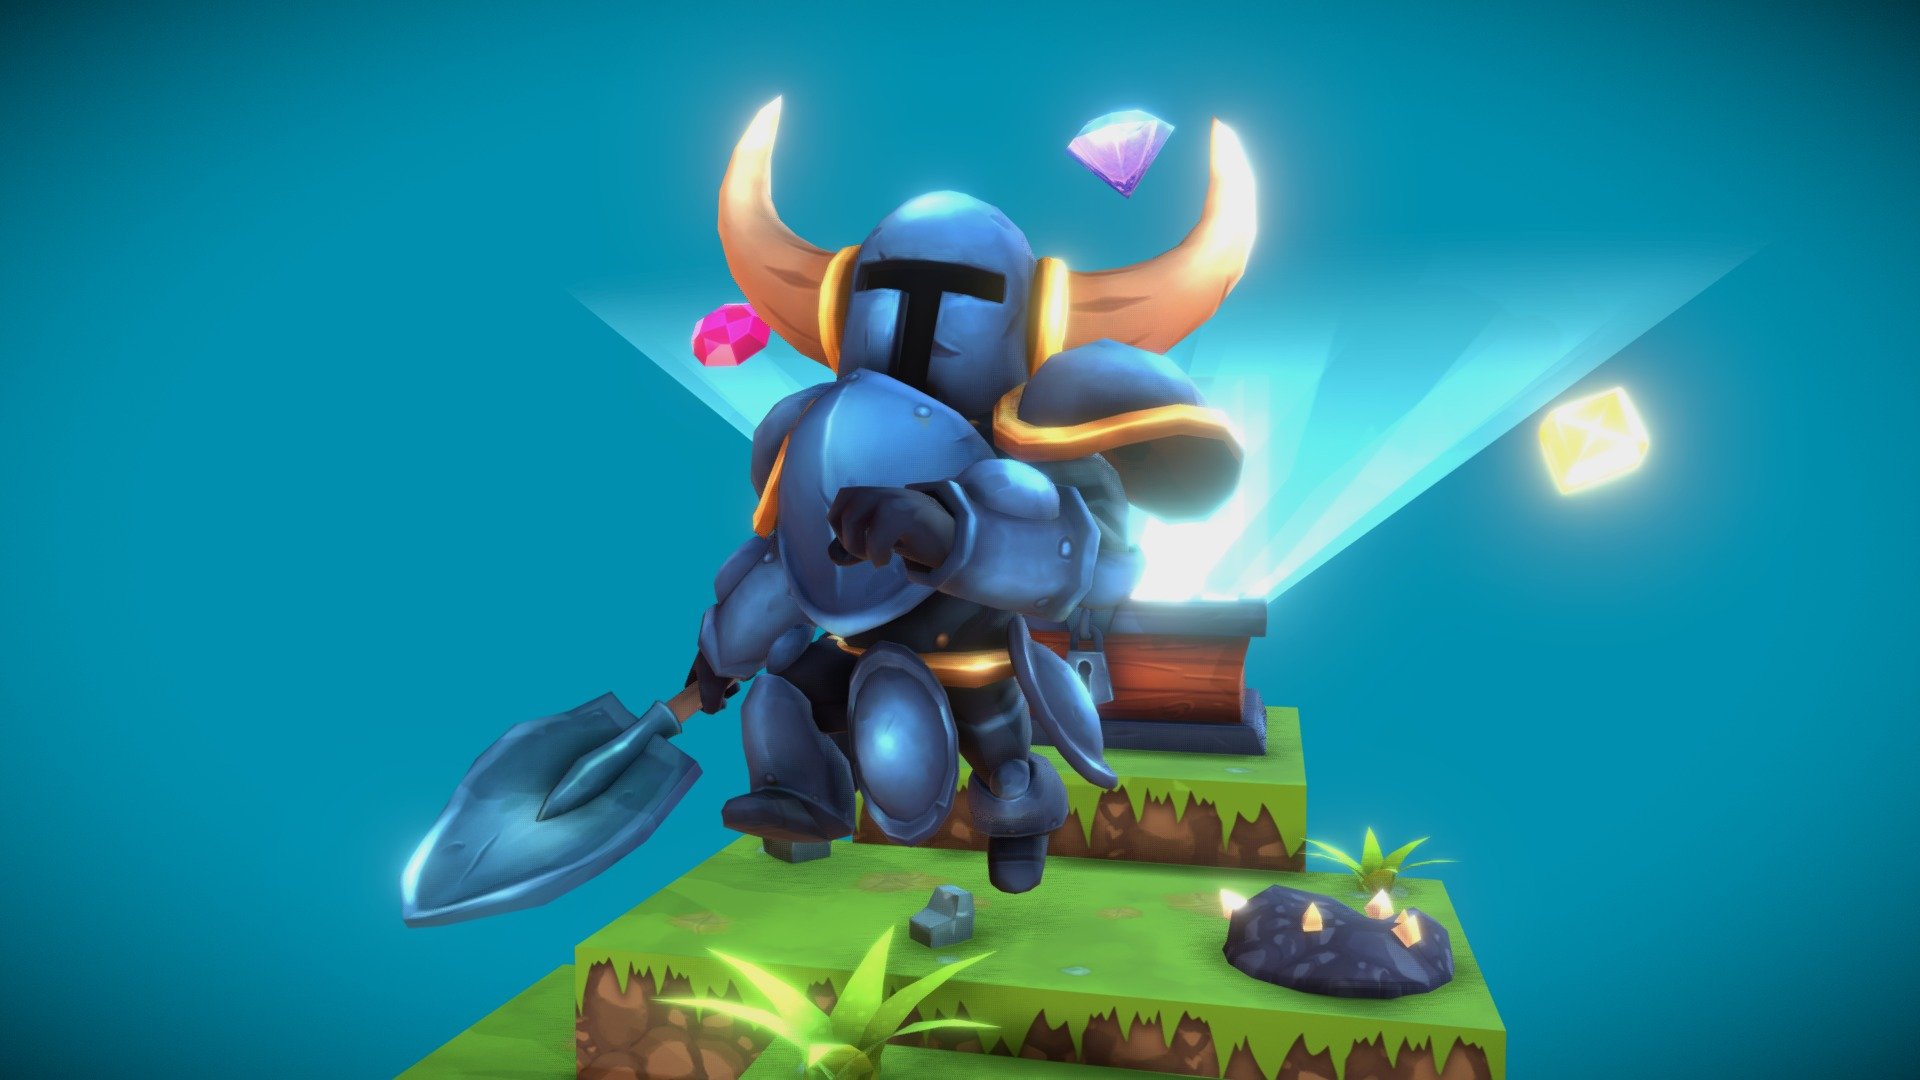 This is my last fanart, based in a beautiful retrogame called Shovel Knight.
A work done in conjunction with a great artist called Ingrid Barrios, I invite you to visit his page and his model of Shield Knight :)
https://sketchfab.com/models/e45baf343fe9478e96fcea3d5daa2885

In this link you can see the Final images
https://www.artstation.com/artwork/PDyP1

This is the link to the wonderful work of ingrid neighborhoods with their Shield Knight: - Shovel Knight Fanart - 3D model by technoir 3d model